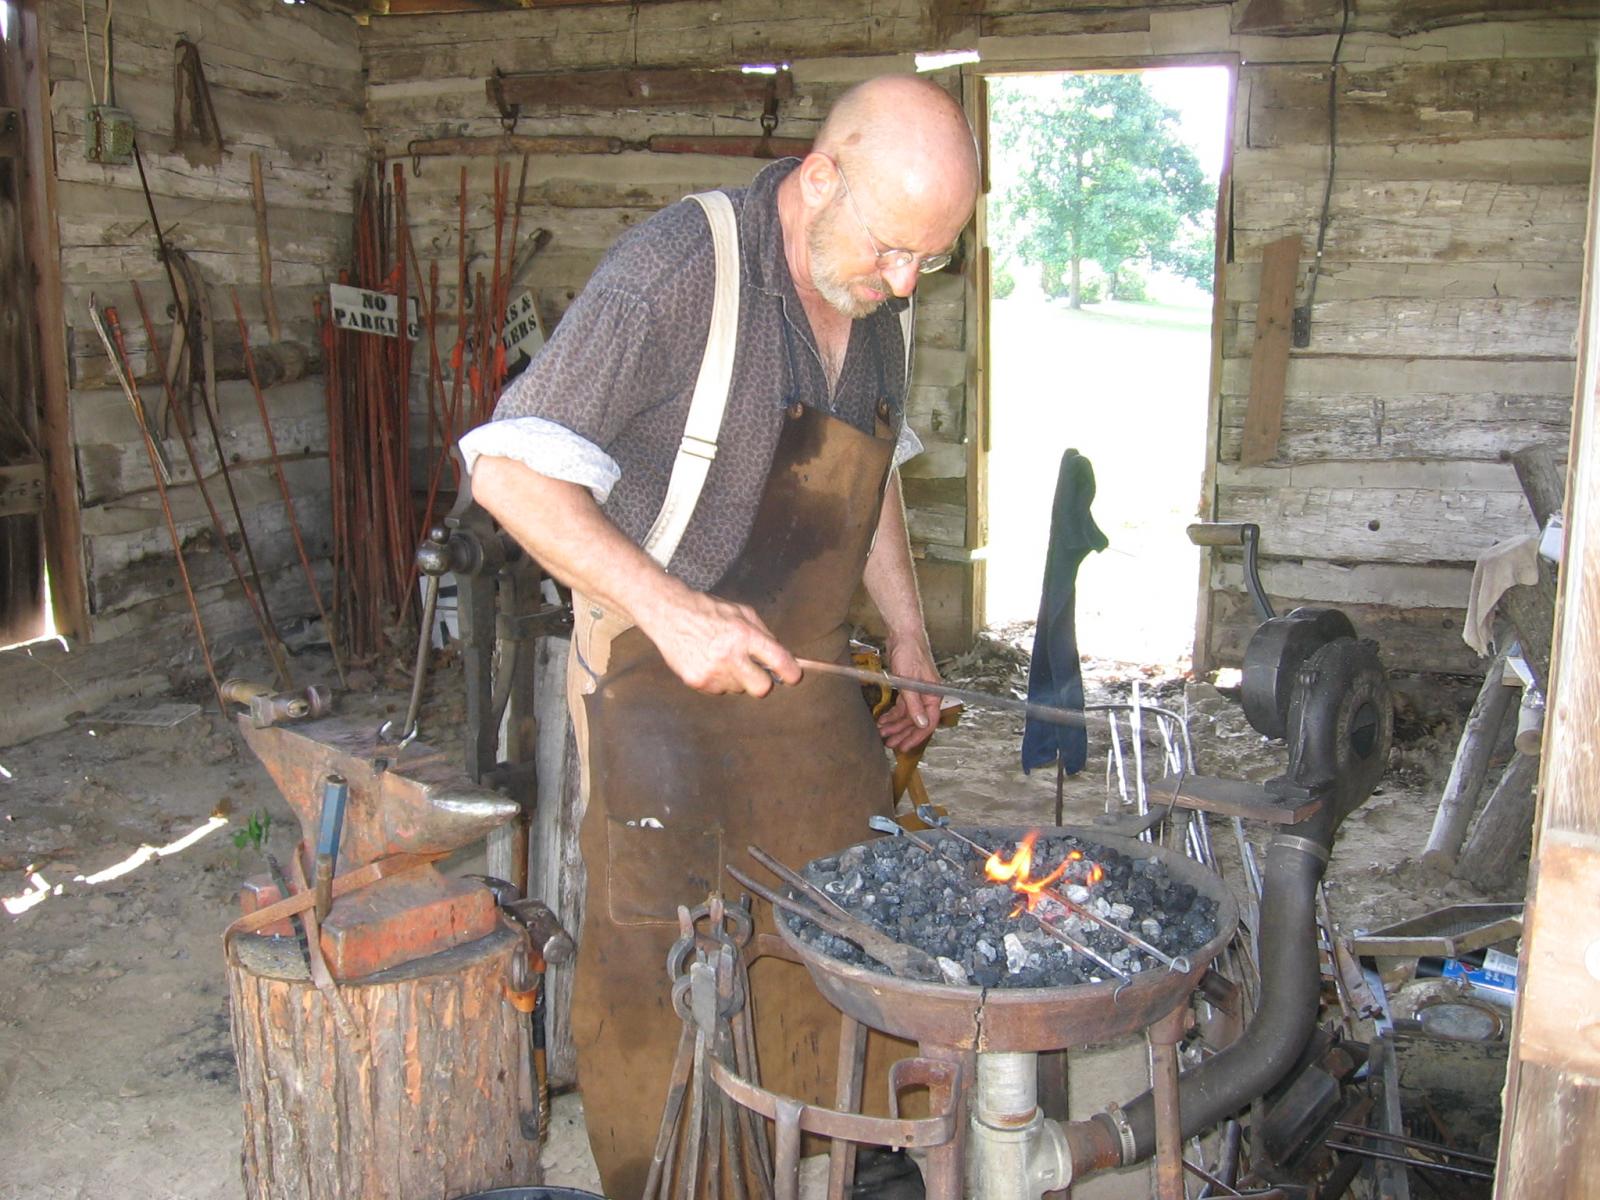 Working the rivet forge